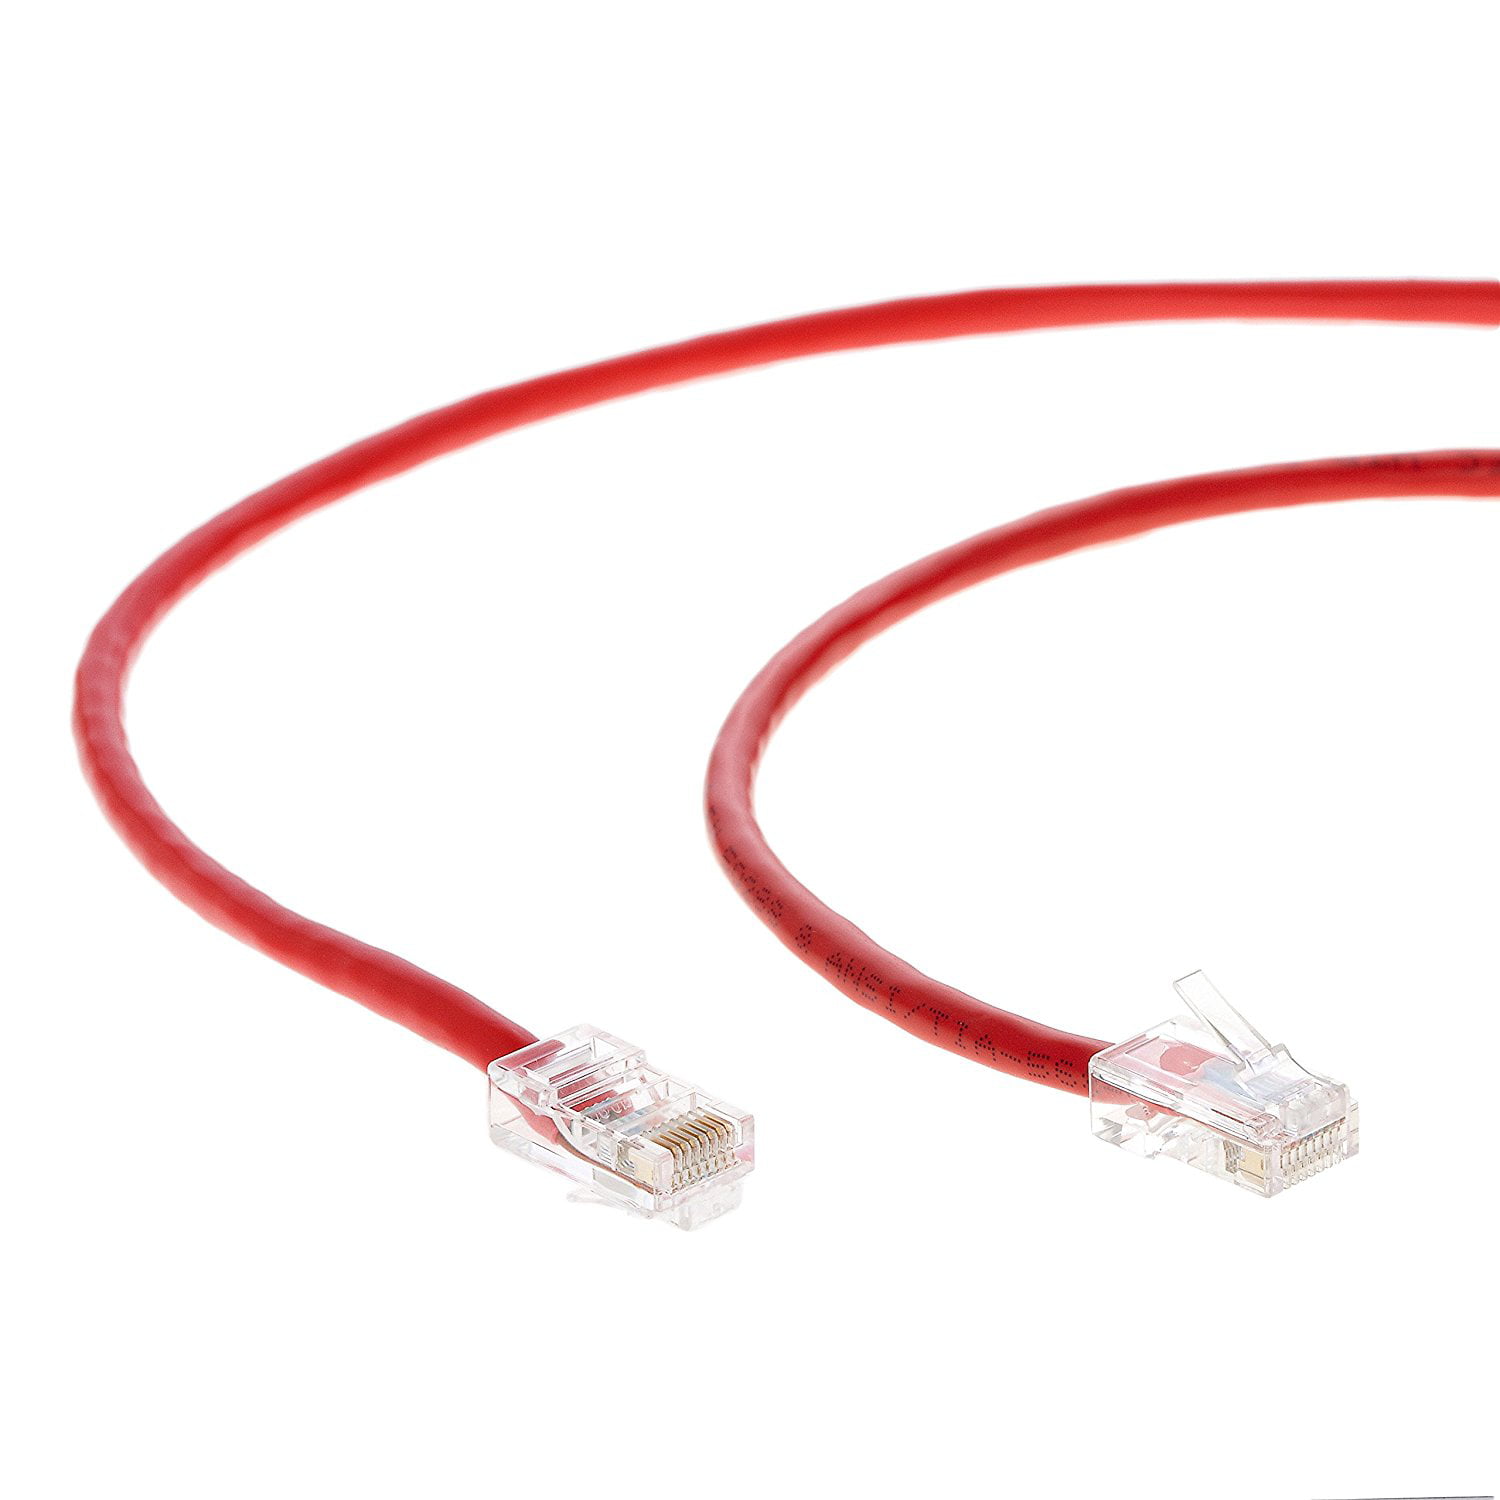 Professional Series 550MHZ Red 10Gigabit/Sec Network/High Speed Internet Cable InstallerParts Ethernet Cable CAT6A Cable UTP Booted 75 FT 